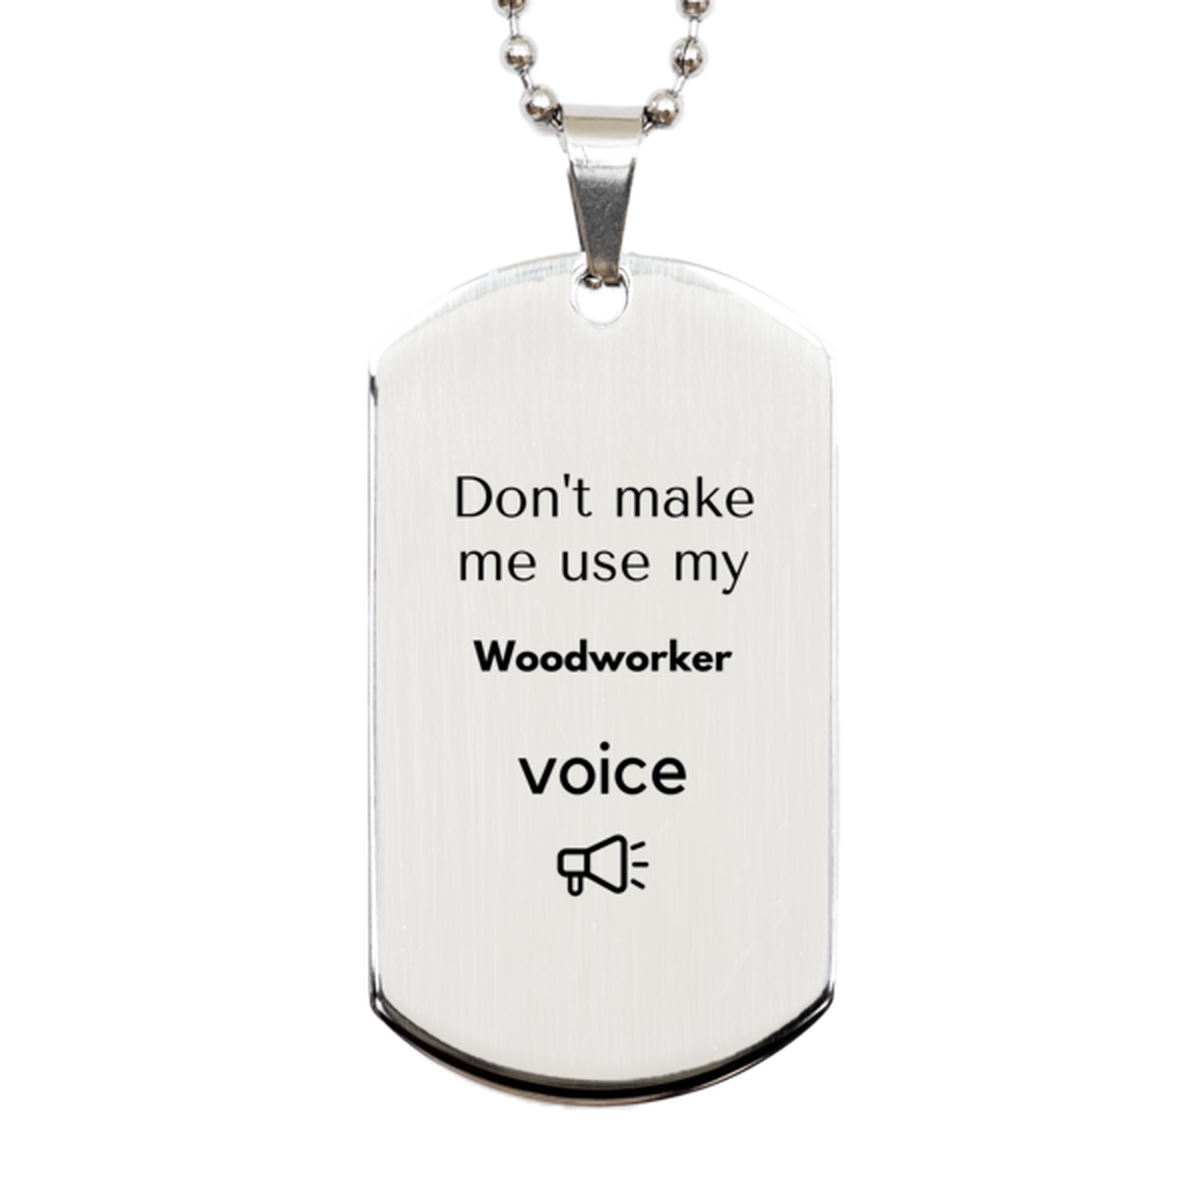 Don't make me use my Woodworker voice, Sarcasm Woodworker Gifts, Christmas Woodworker Silver Dog Tag Birthday Unique Gifts For Woodworker Coworkers, Men, Women, Colleague, Friends